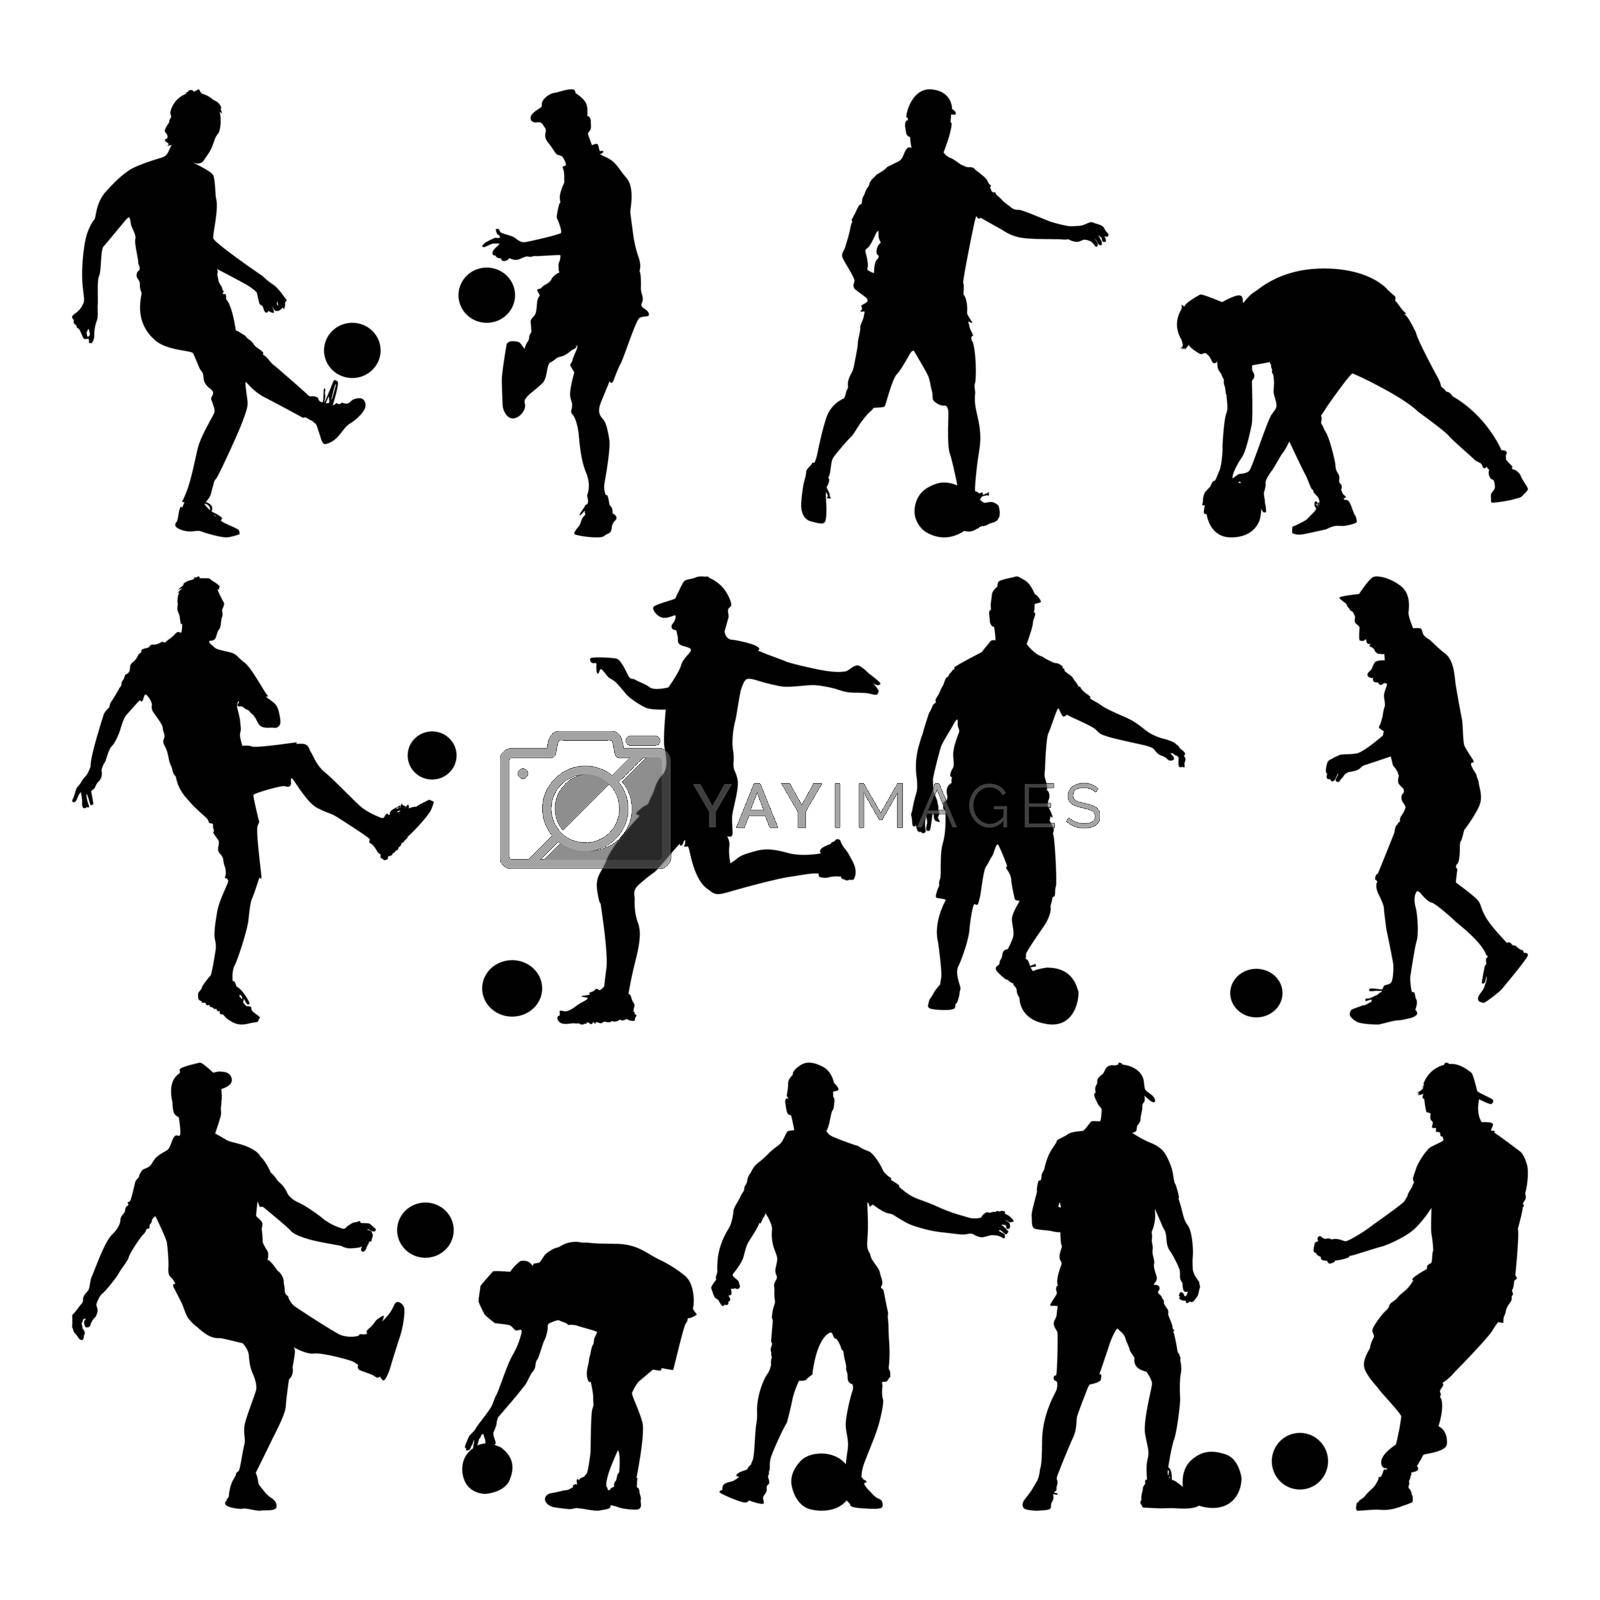 Royalty free image of Set of soccer players silhouettes isolated on white background. by KajaNi